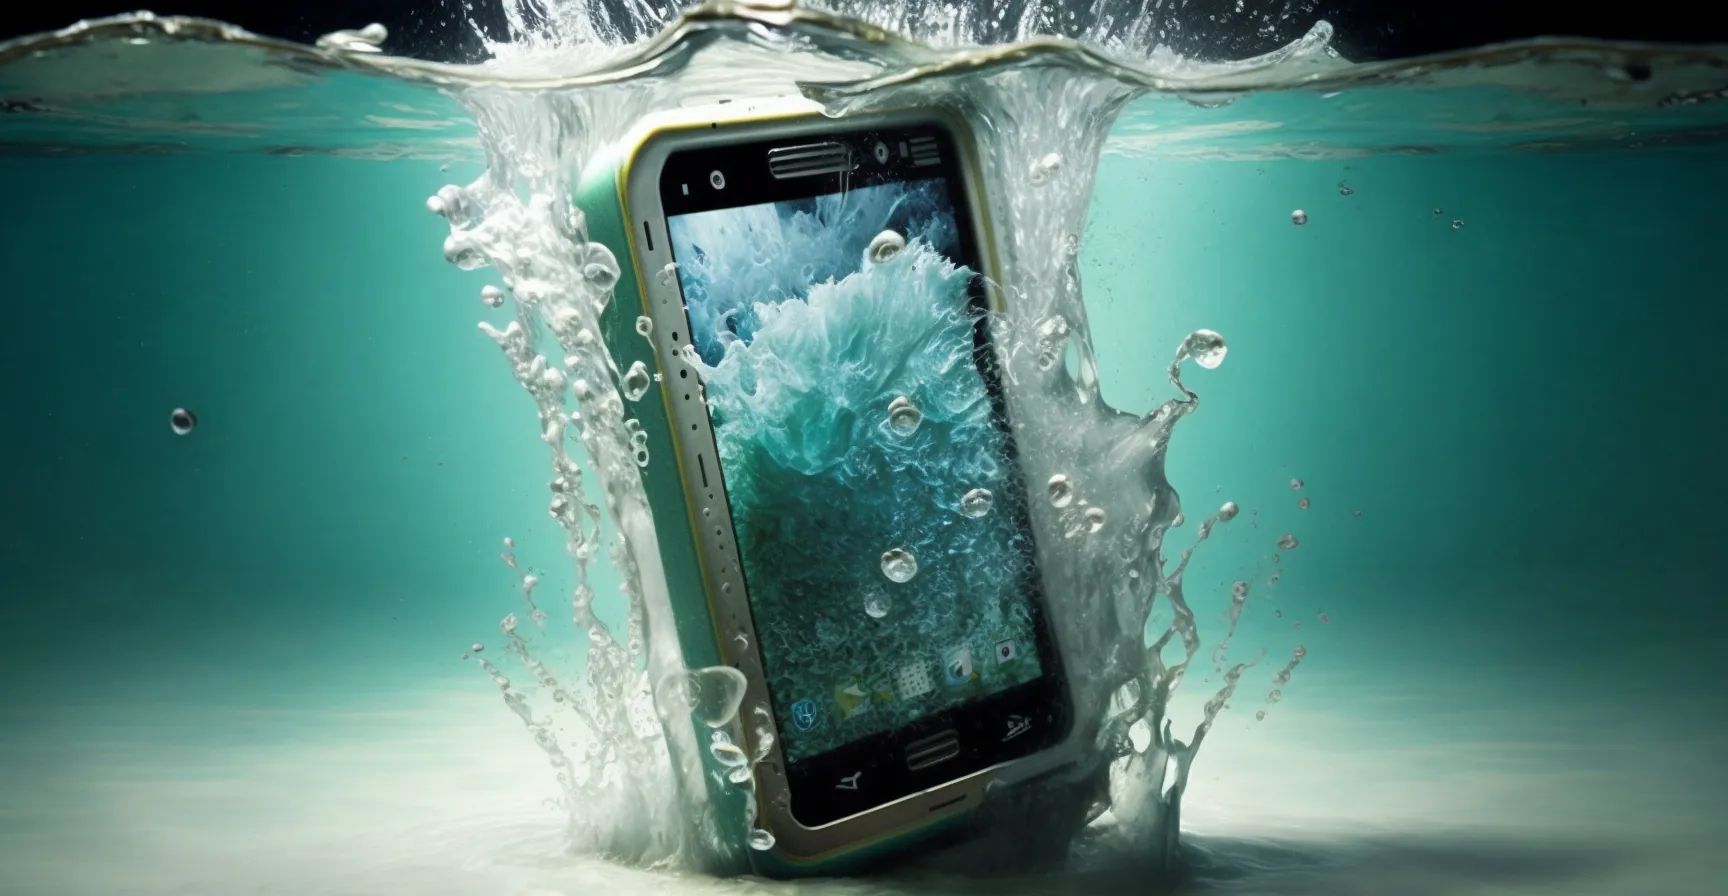 Identifying The Market’s Most Durable And Reliable Waterproof Cell Phone